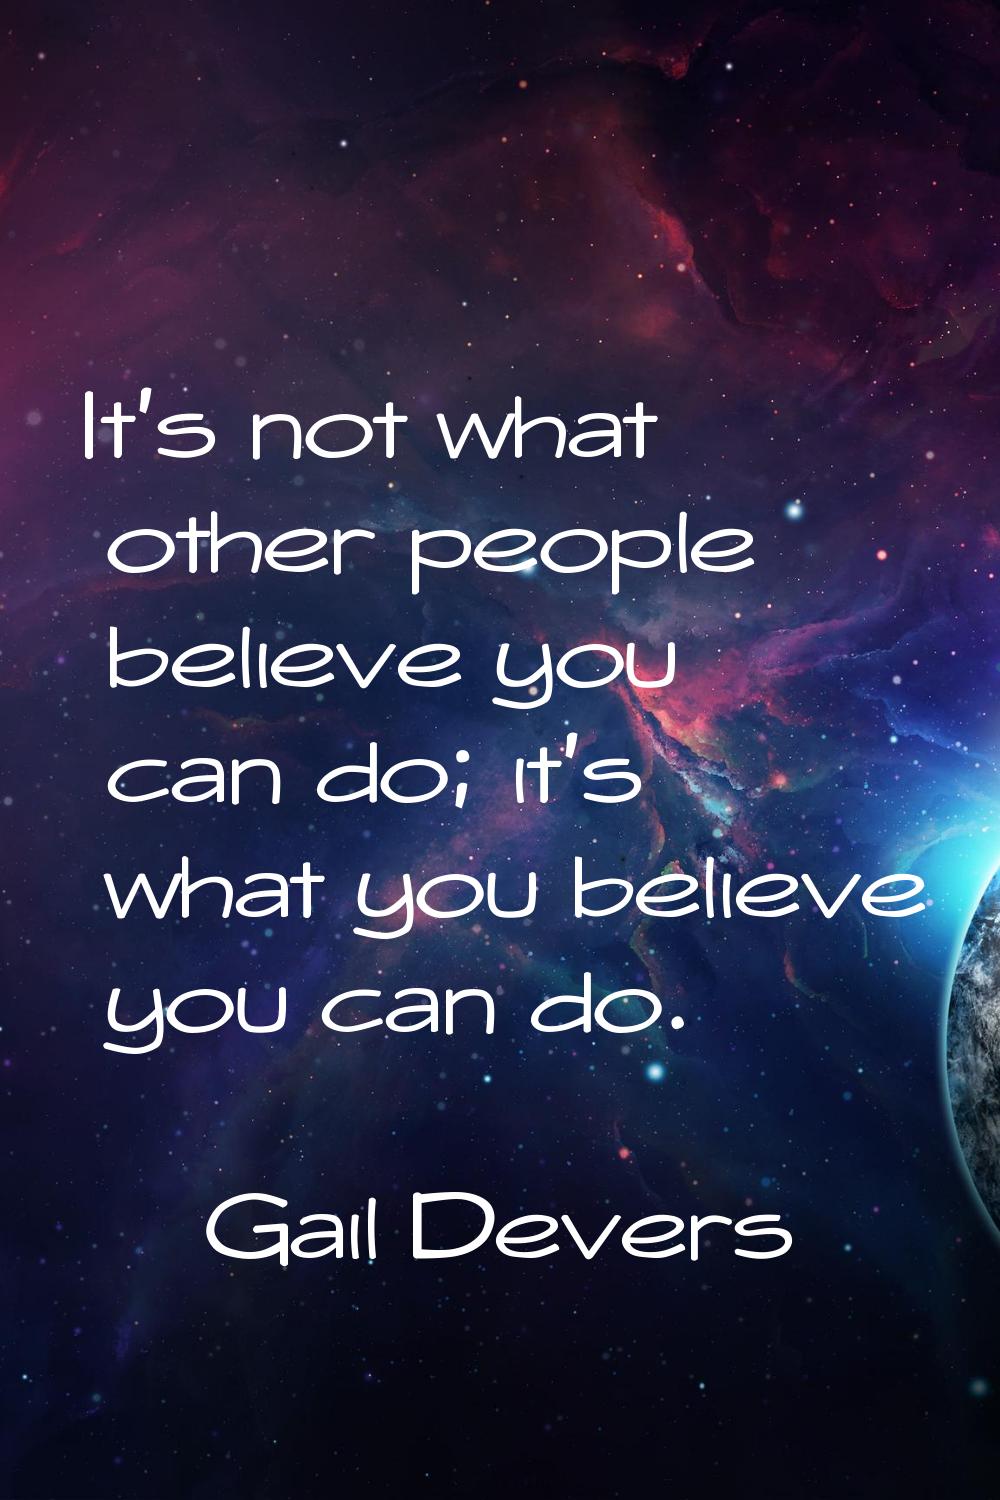 It's not what other people believe you can do; it's what you believe you can do.